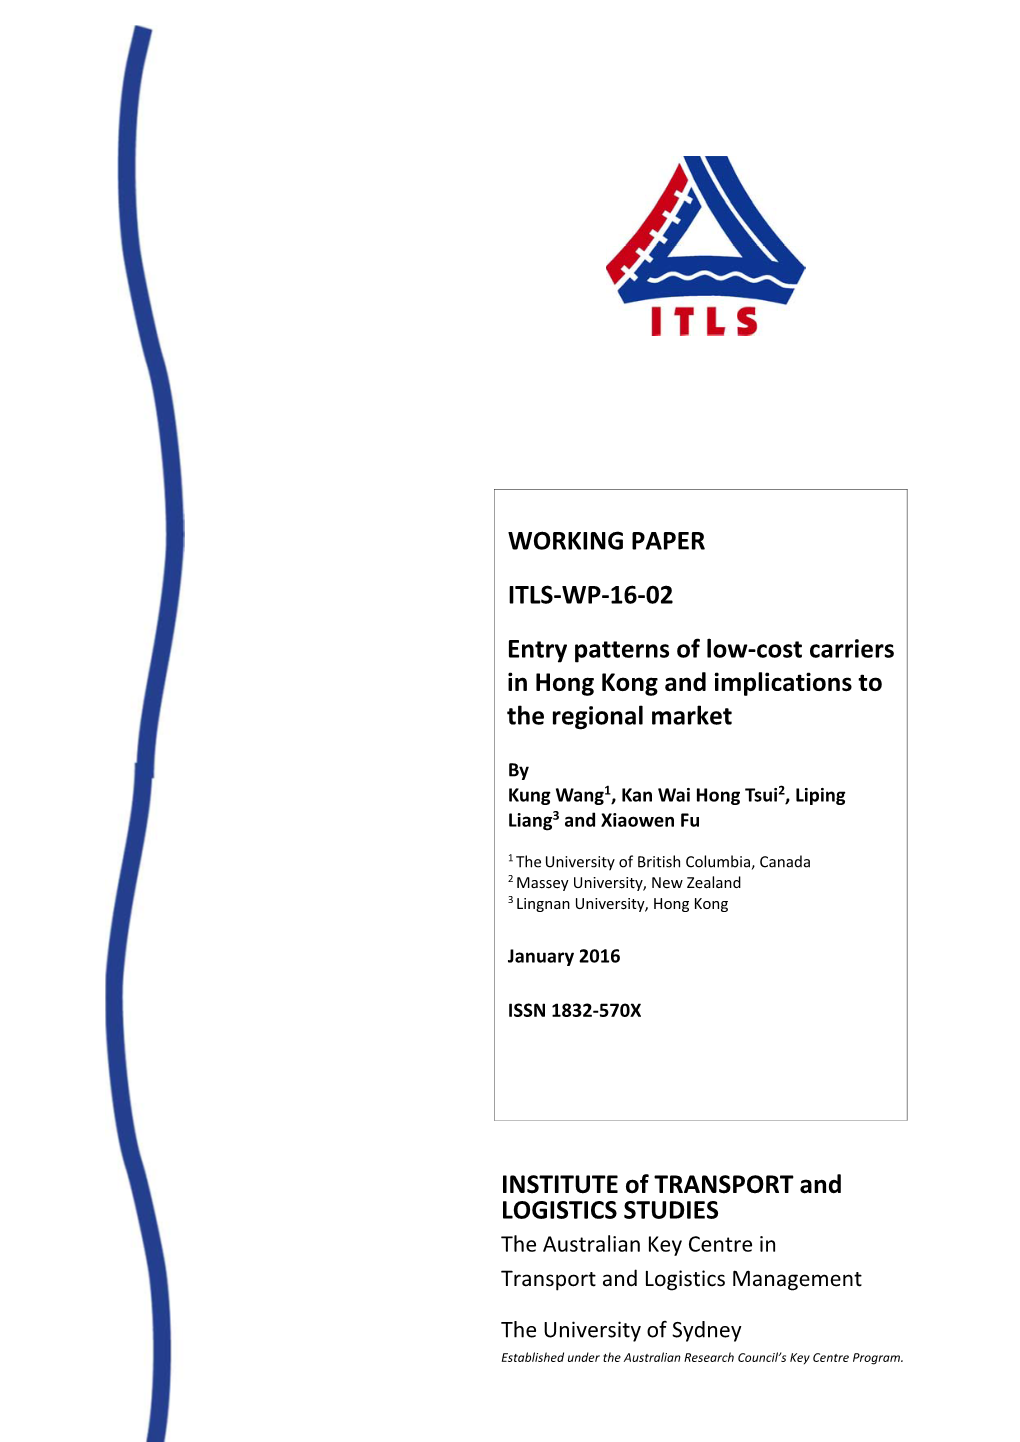 WORKING PAPER ITLS-WP-16-02 Entry Patterns of Low-Cost Carriers In